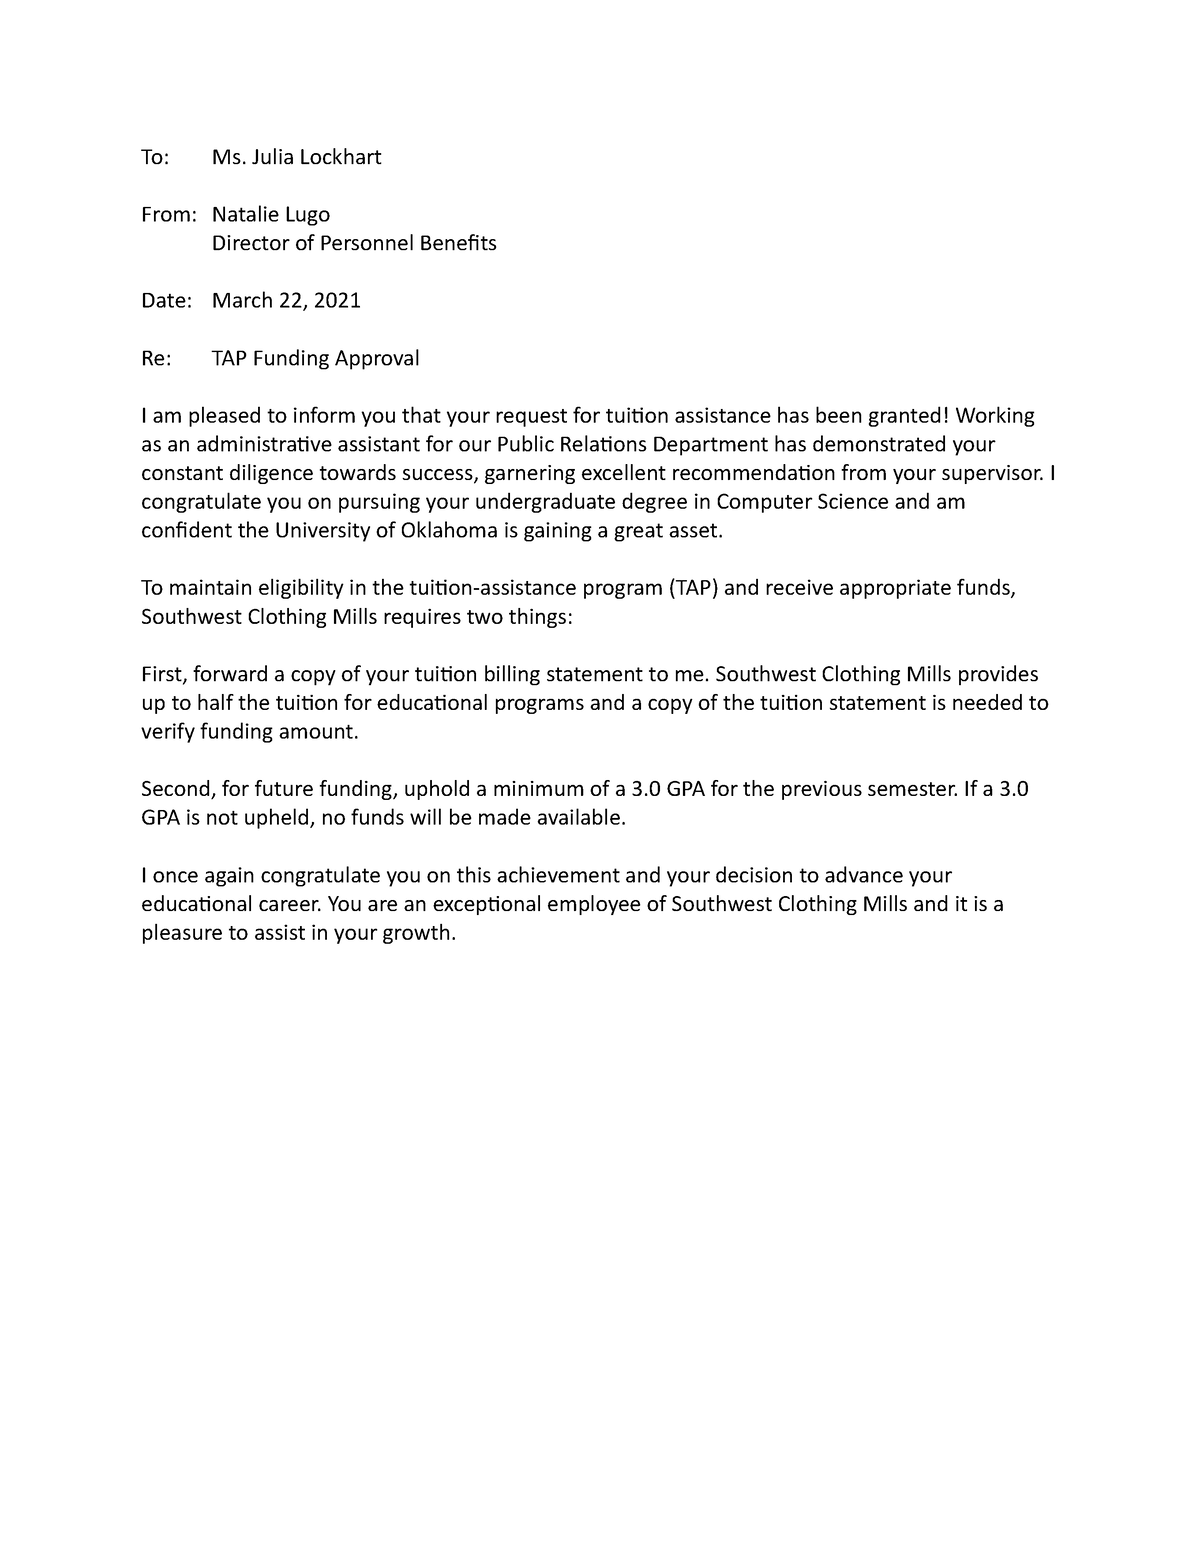 BUS 3050 Good News Message draft - To: Ms. Julia Lockhart From: Natalie ...